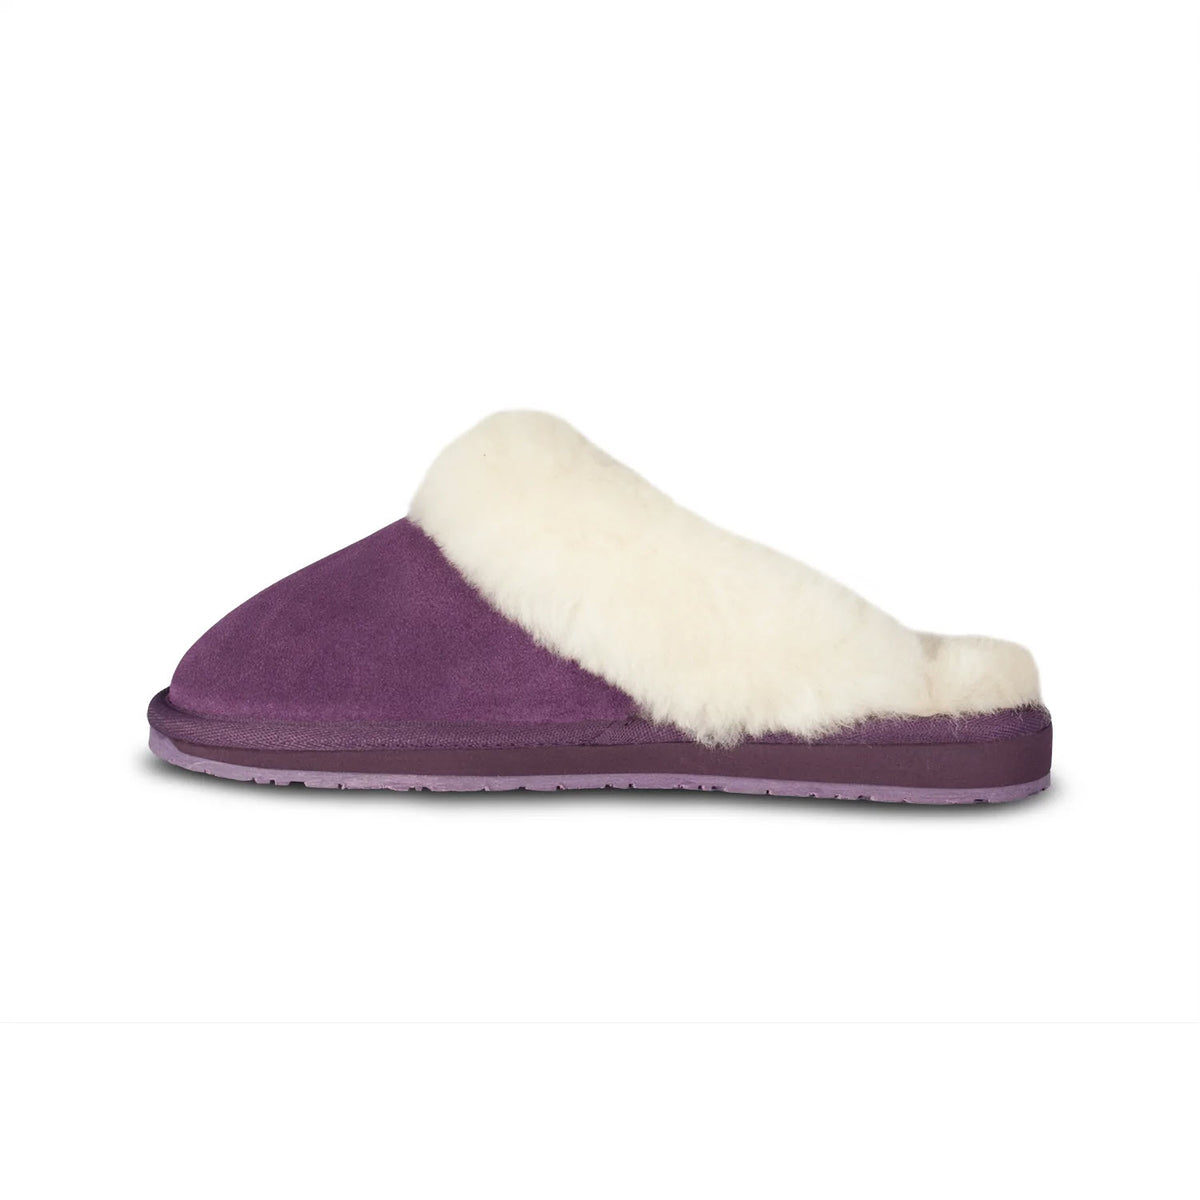 A single Cloud Nine ladies scuff purple slipper with white sheepskin lining and a matching purple sole, displayed against a white background.